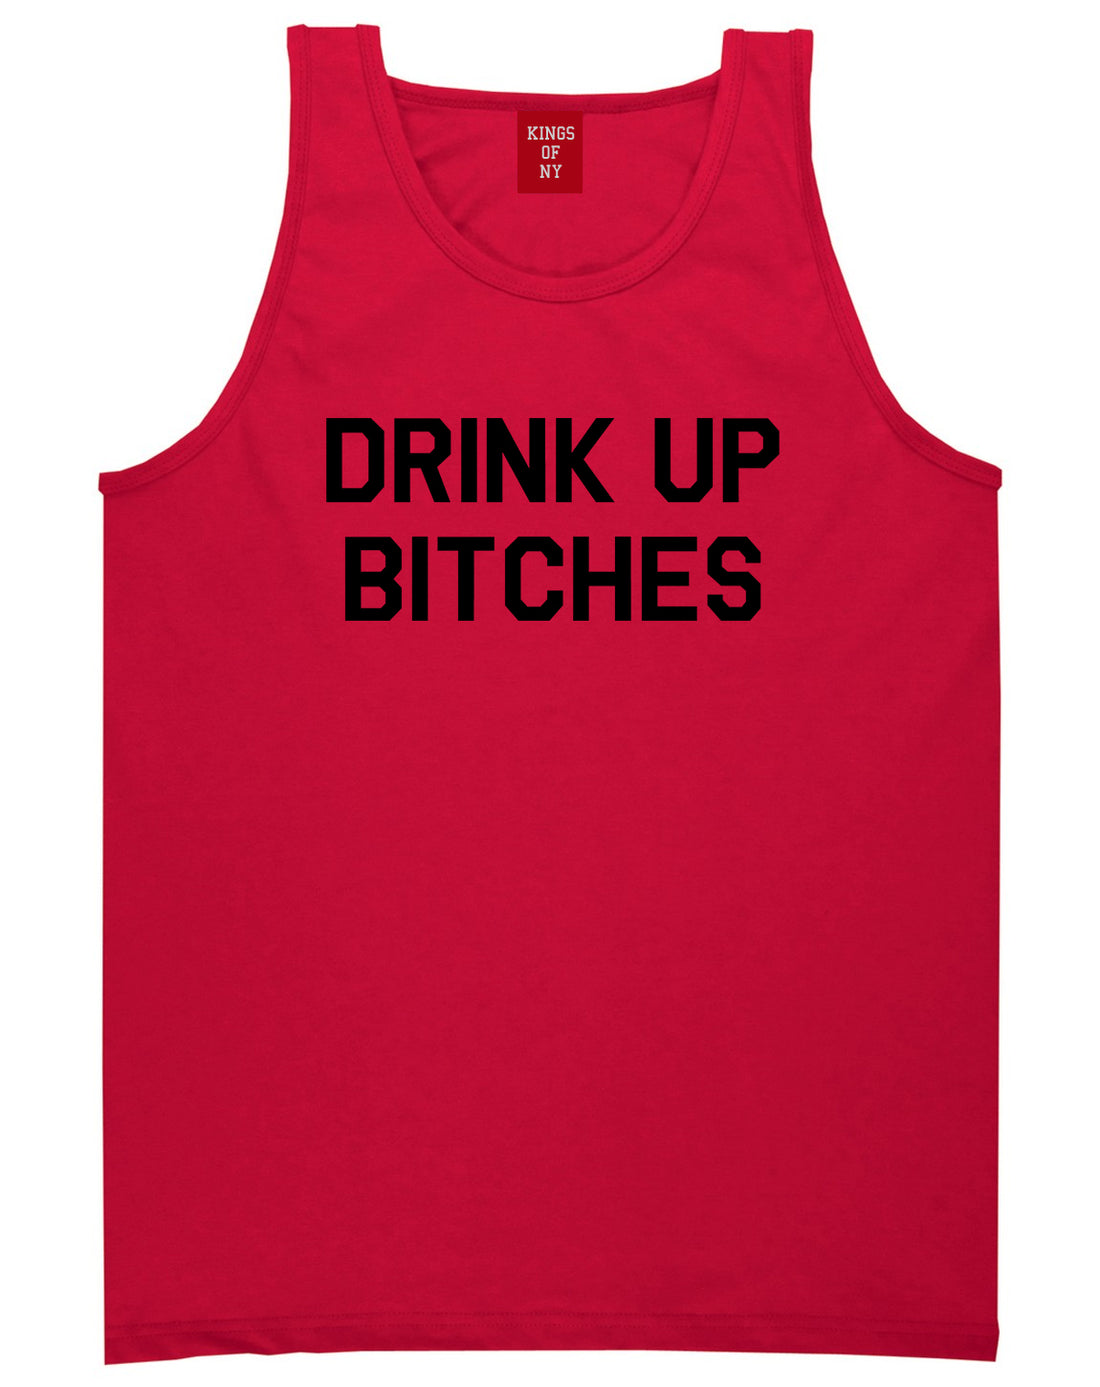 Drink_Up_Bitches Mens Red Tank Top Shirt by Kings Of NY